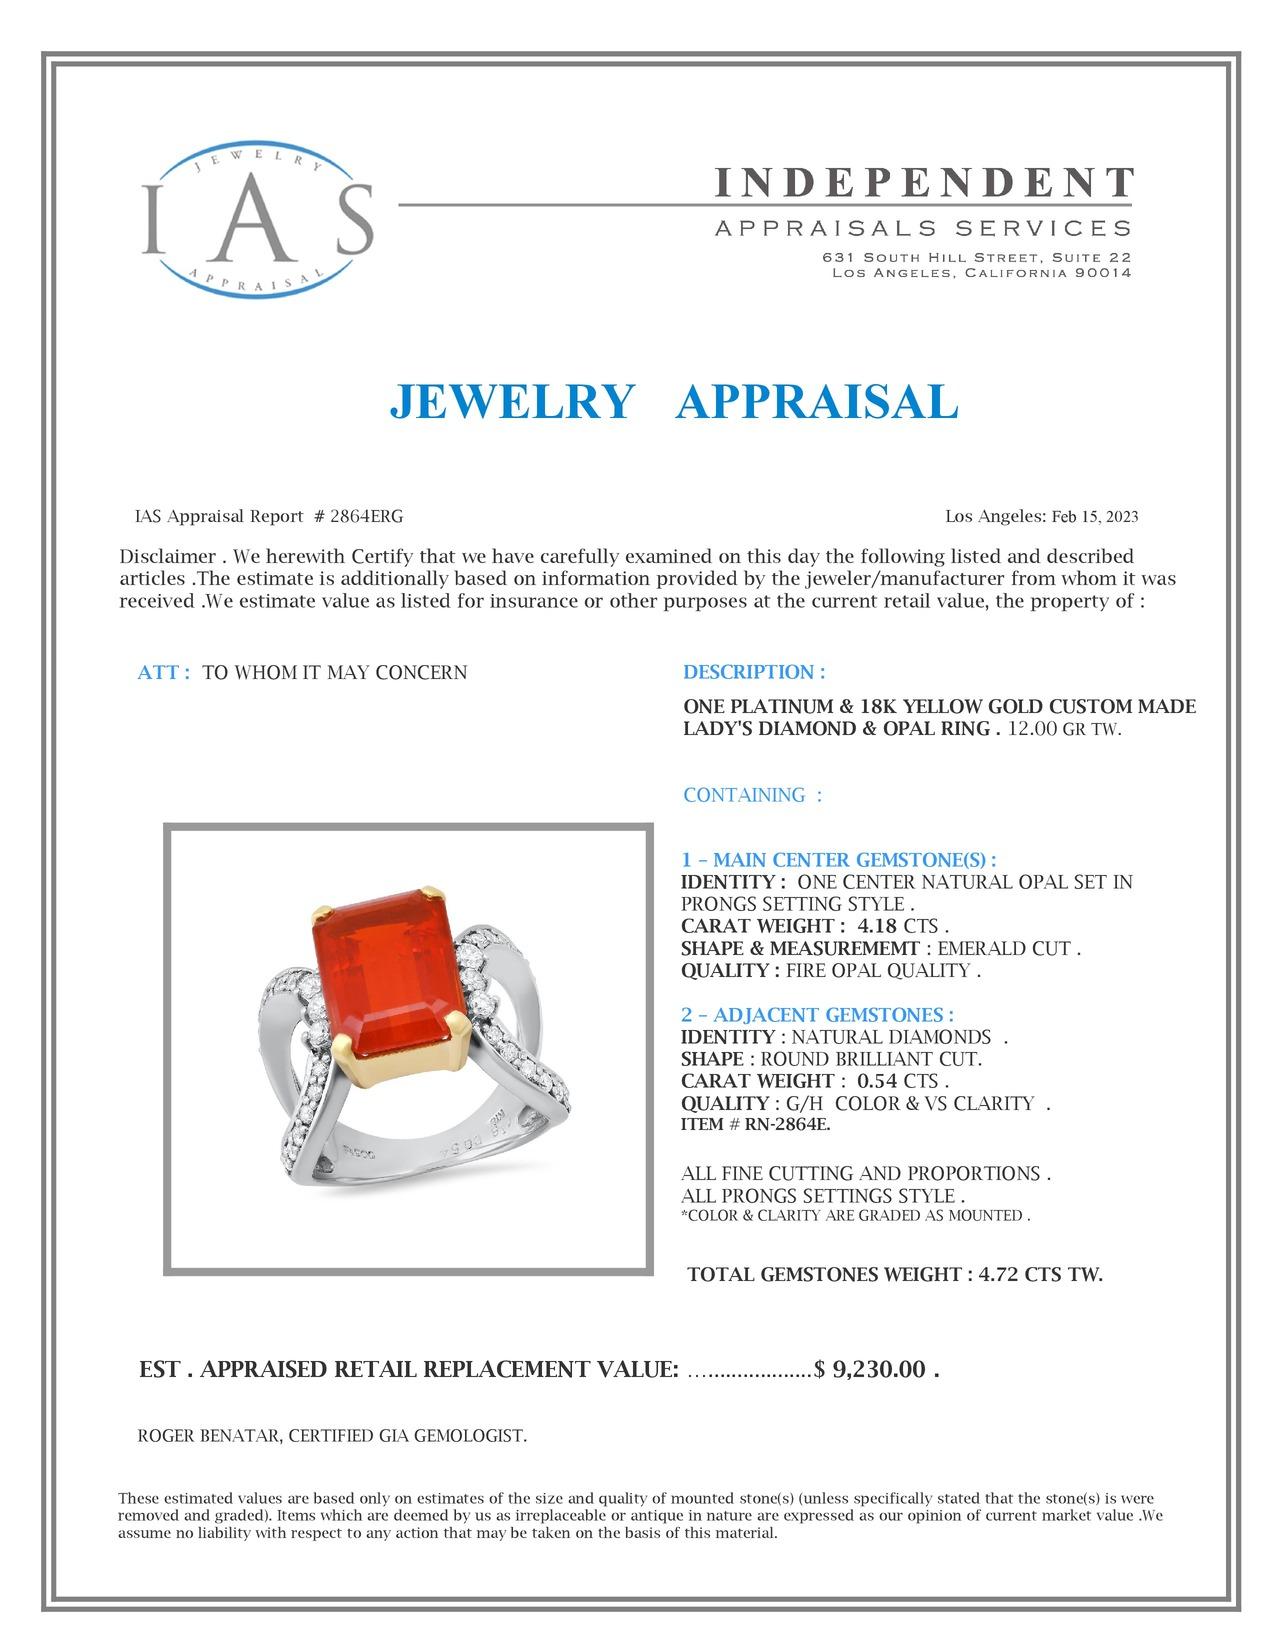 Platinum Setting with 4.18ct Fire Opal and 0.54ct Diamond Ladies Ring